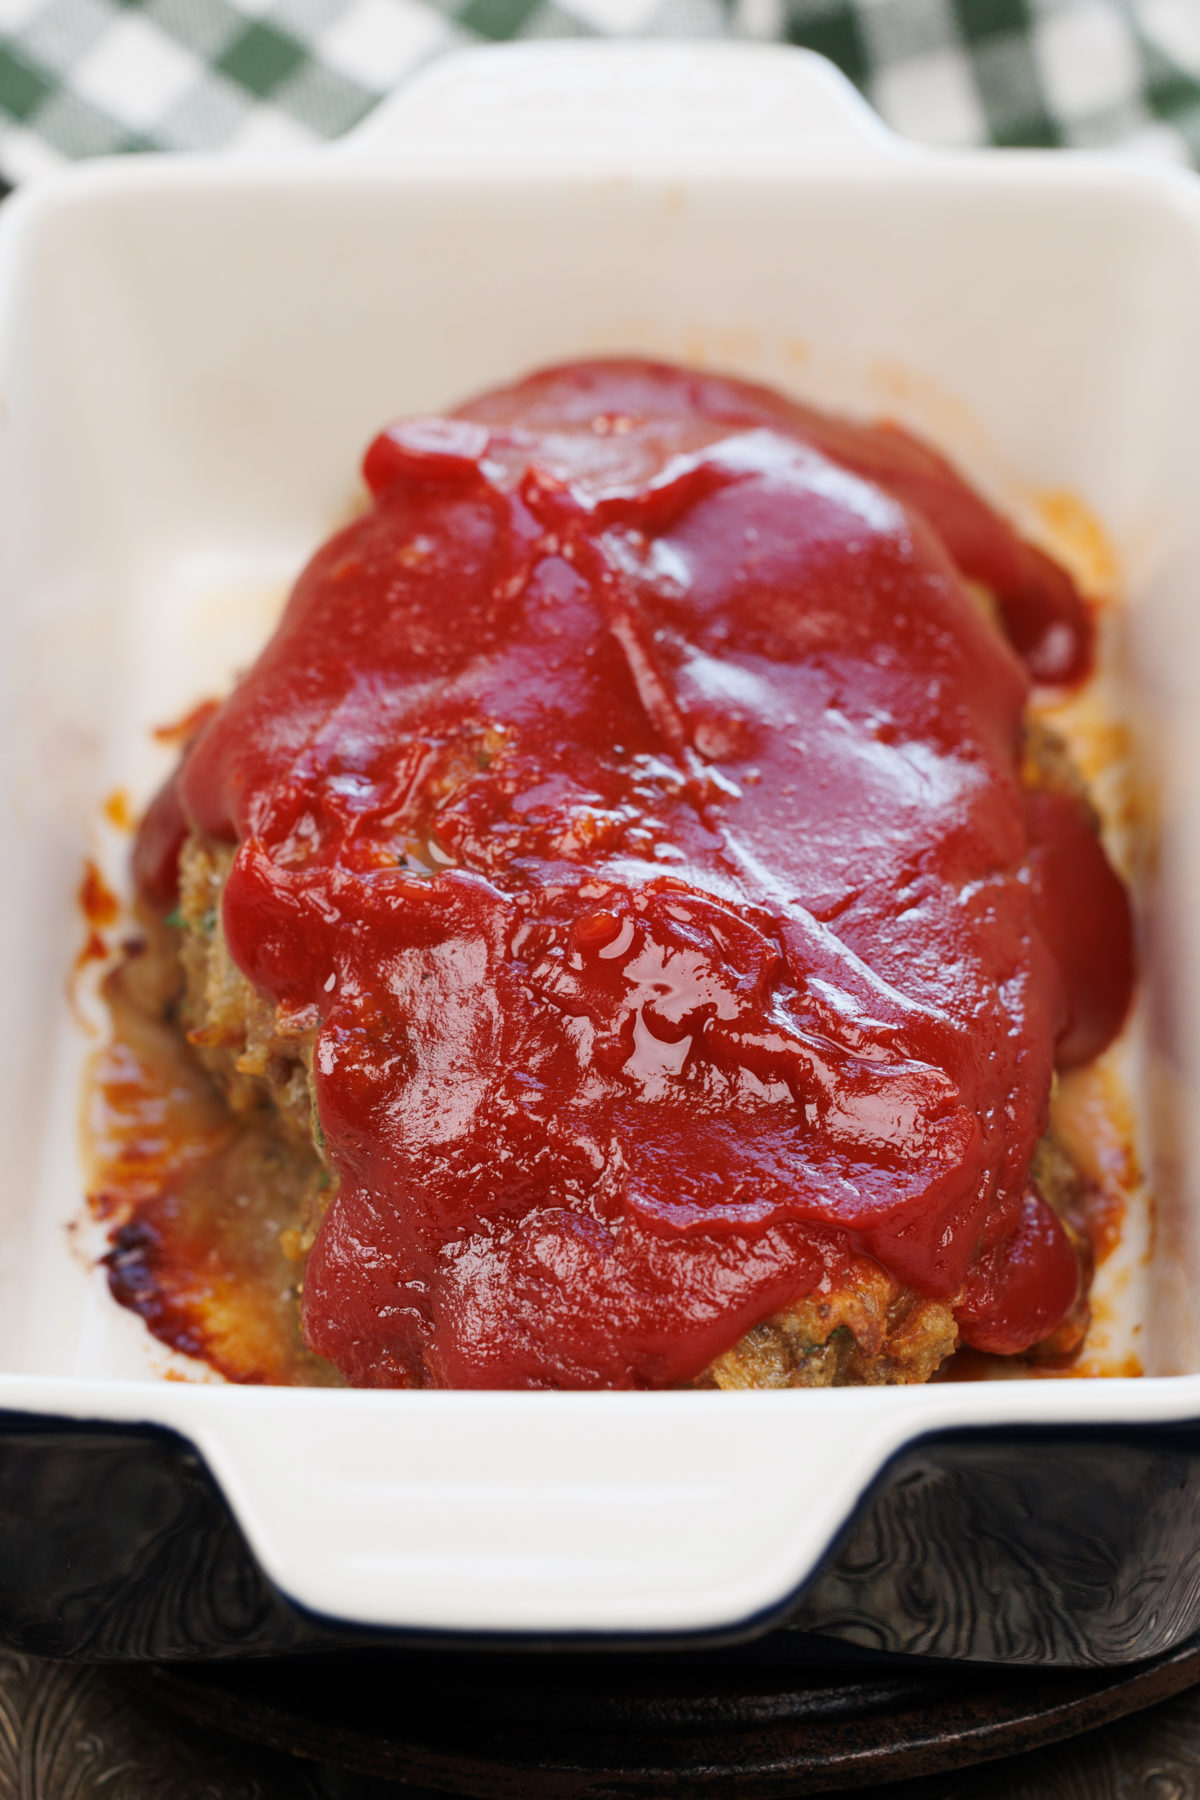 a mini meatloaf in a small baking dish on a wooden counter.